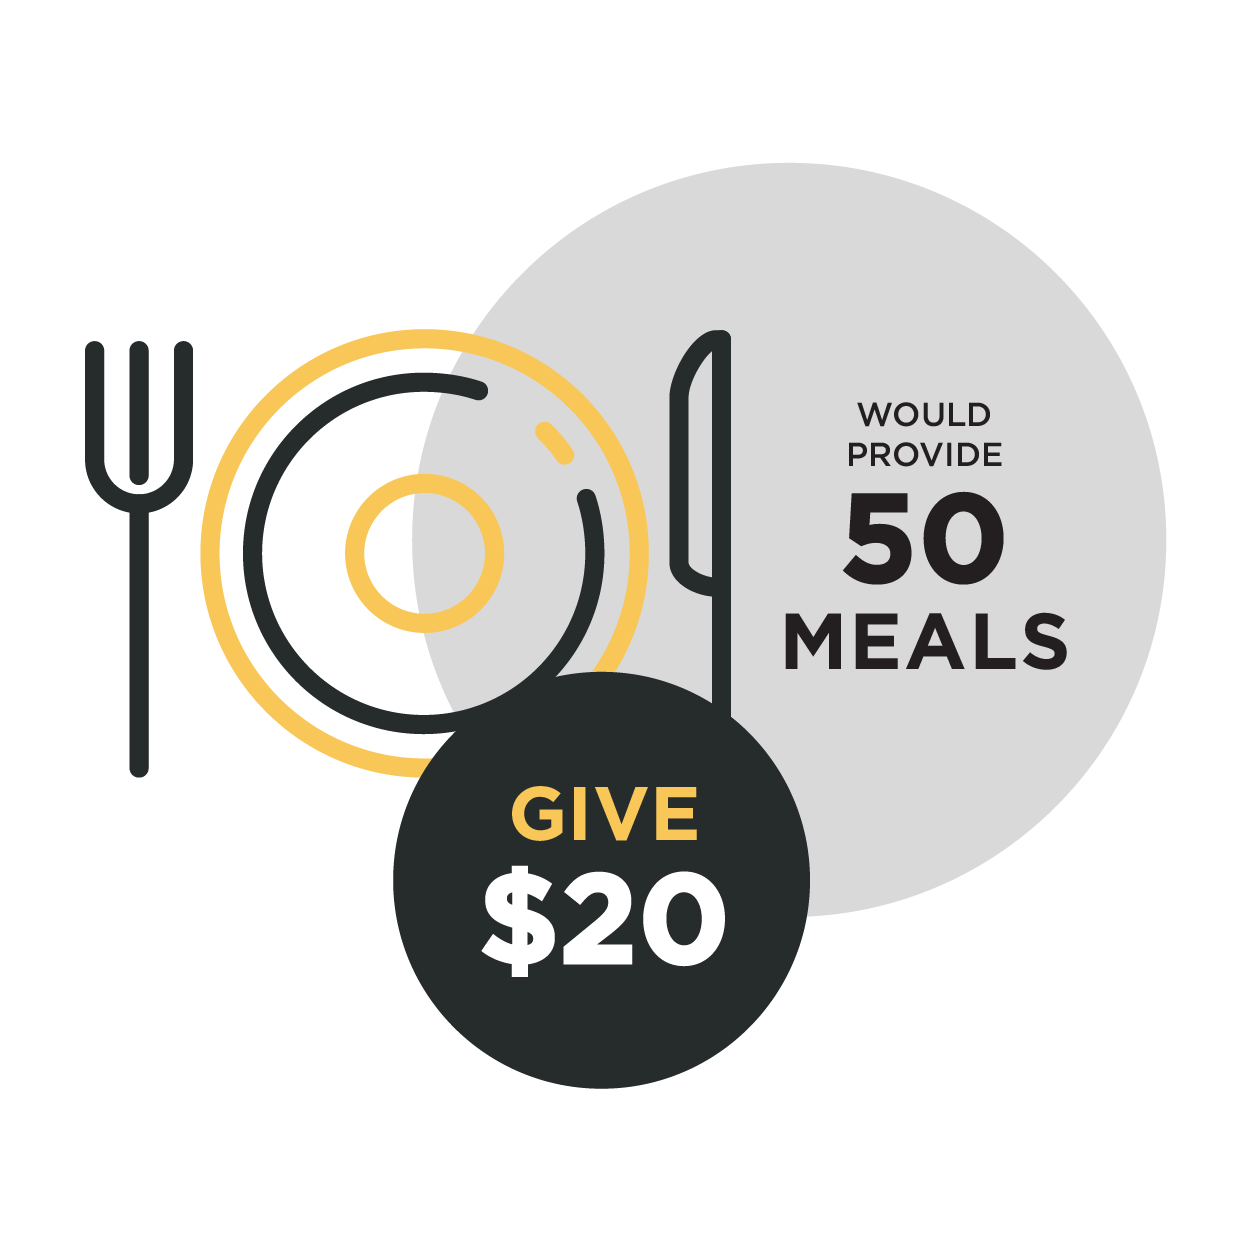 Give $20 will provide 50 meals